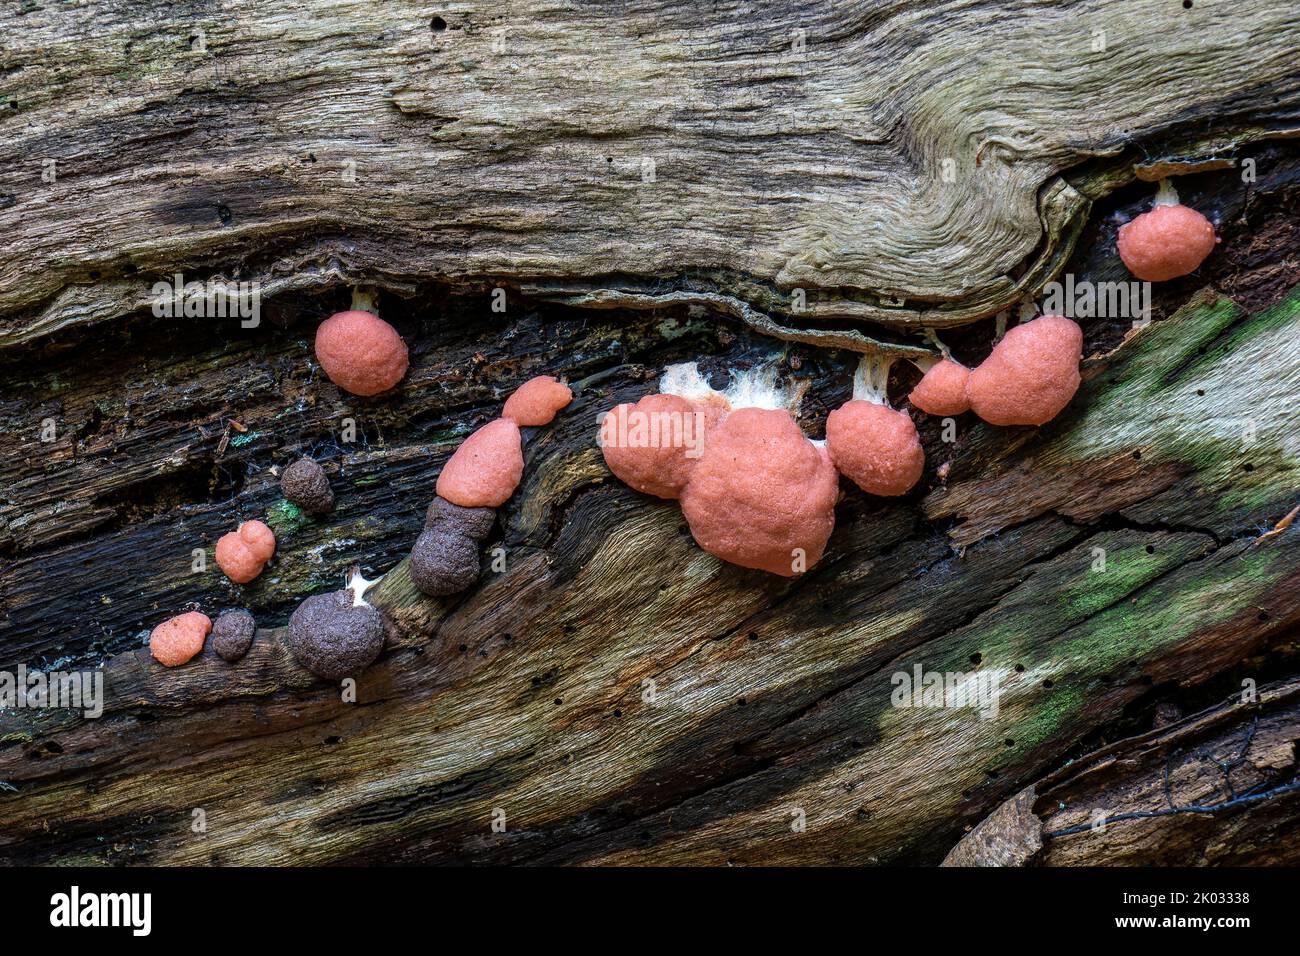 Red slime fungus, slime mold on dead wood Stock Photo